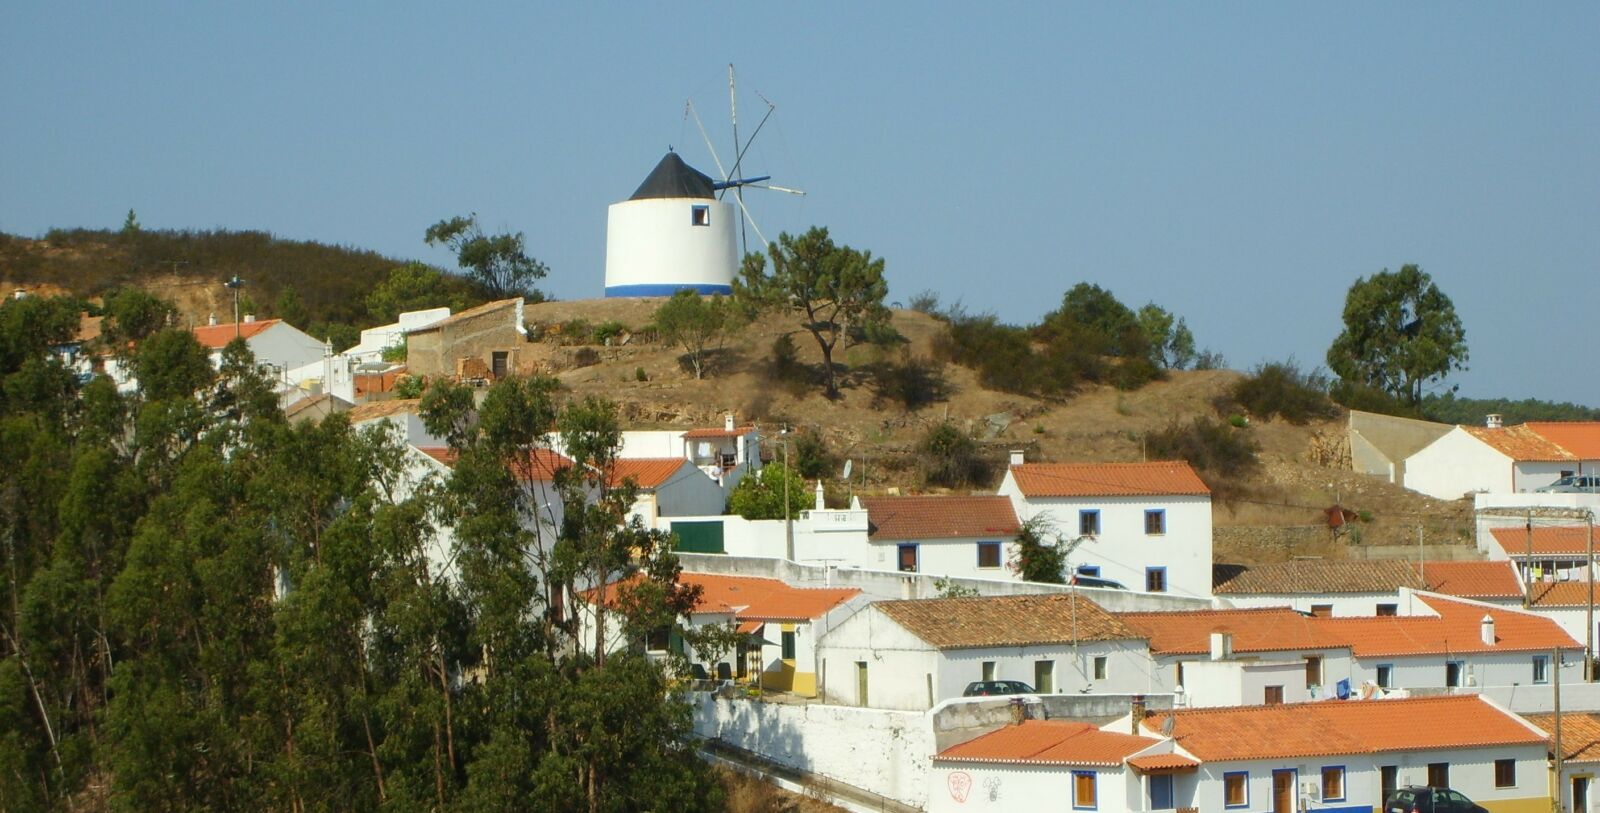 Windmill and houses